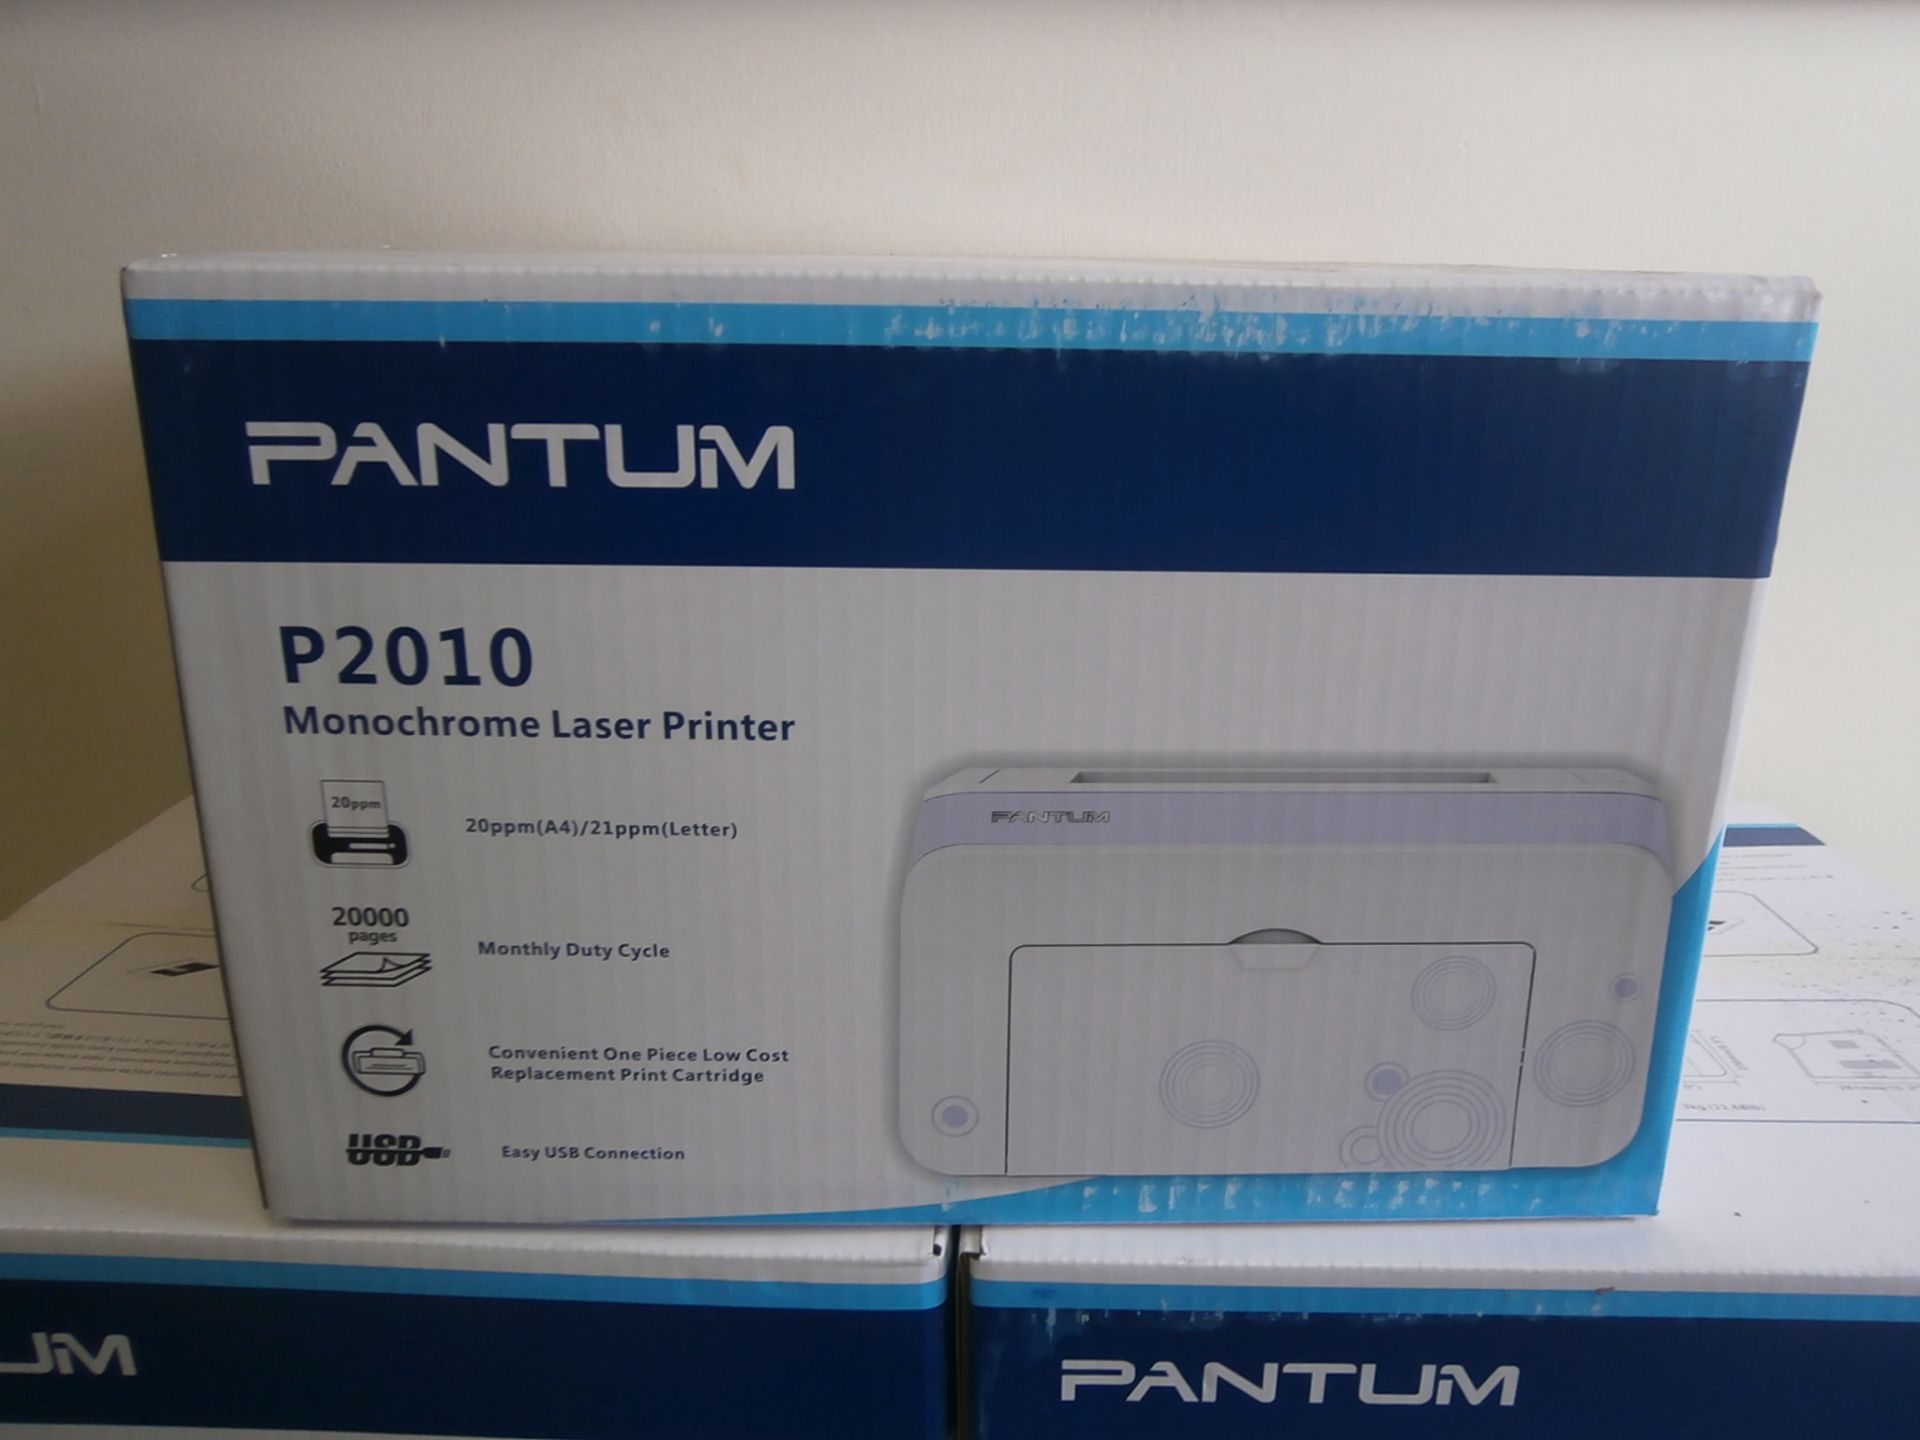 5 x Pantum P2010 Monochrome Laser Printers - RRP £49.99 Each (These printers are great value for - Image 2 of 3